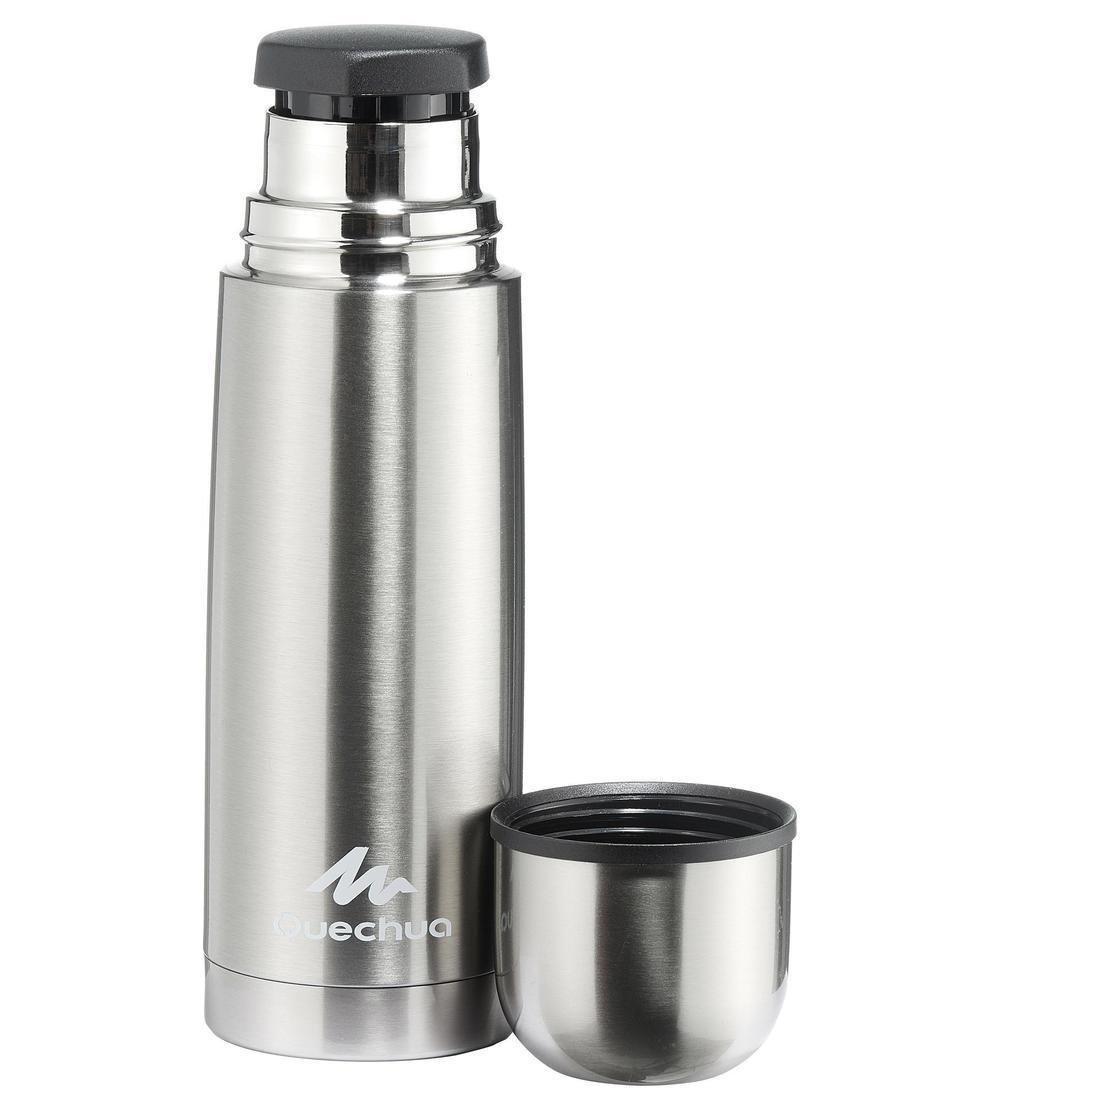 QUECHUA - Stainless Steel Isothermal Bottle, Grey